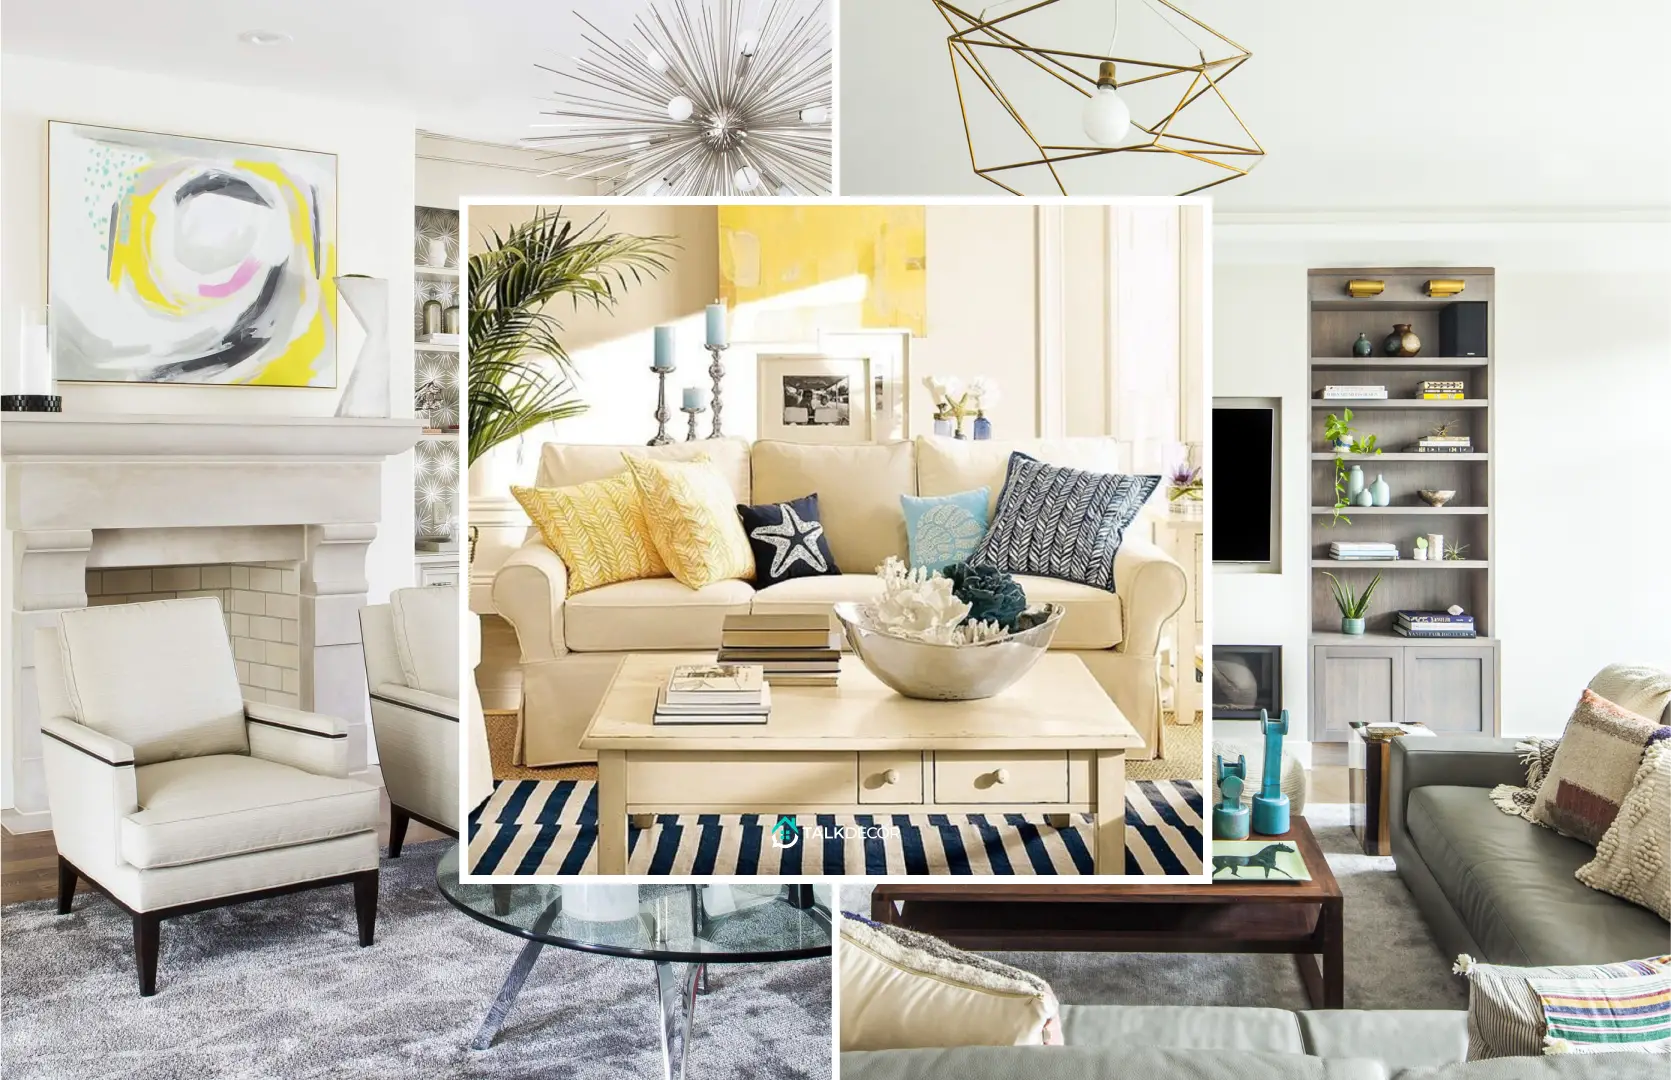 14 Things You Should Provide for Your Living Room Decoration